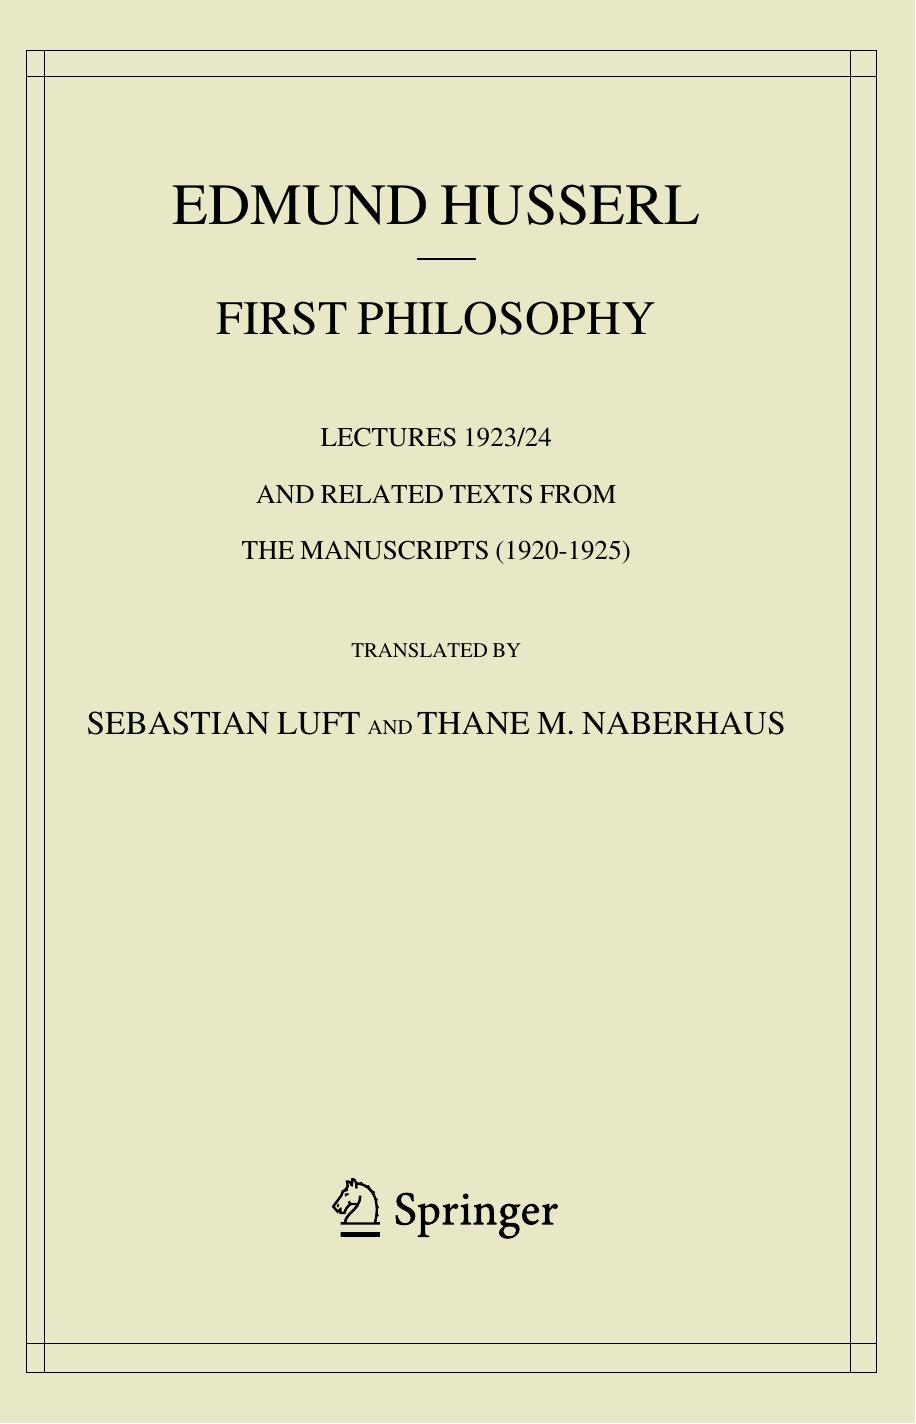 First Philosophy: Lectures 1923/24 and Related Texts From the Manuscripts (1920-1925)